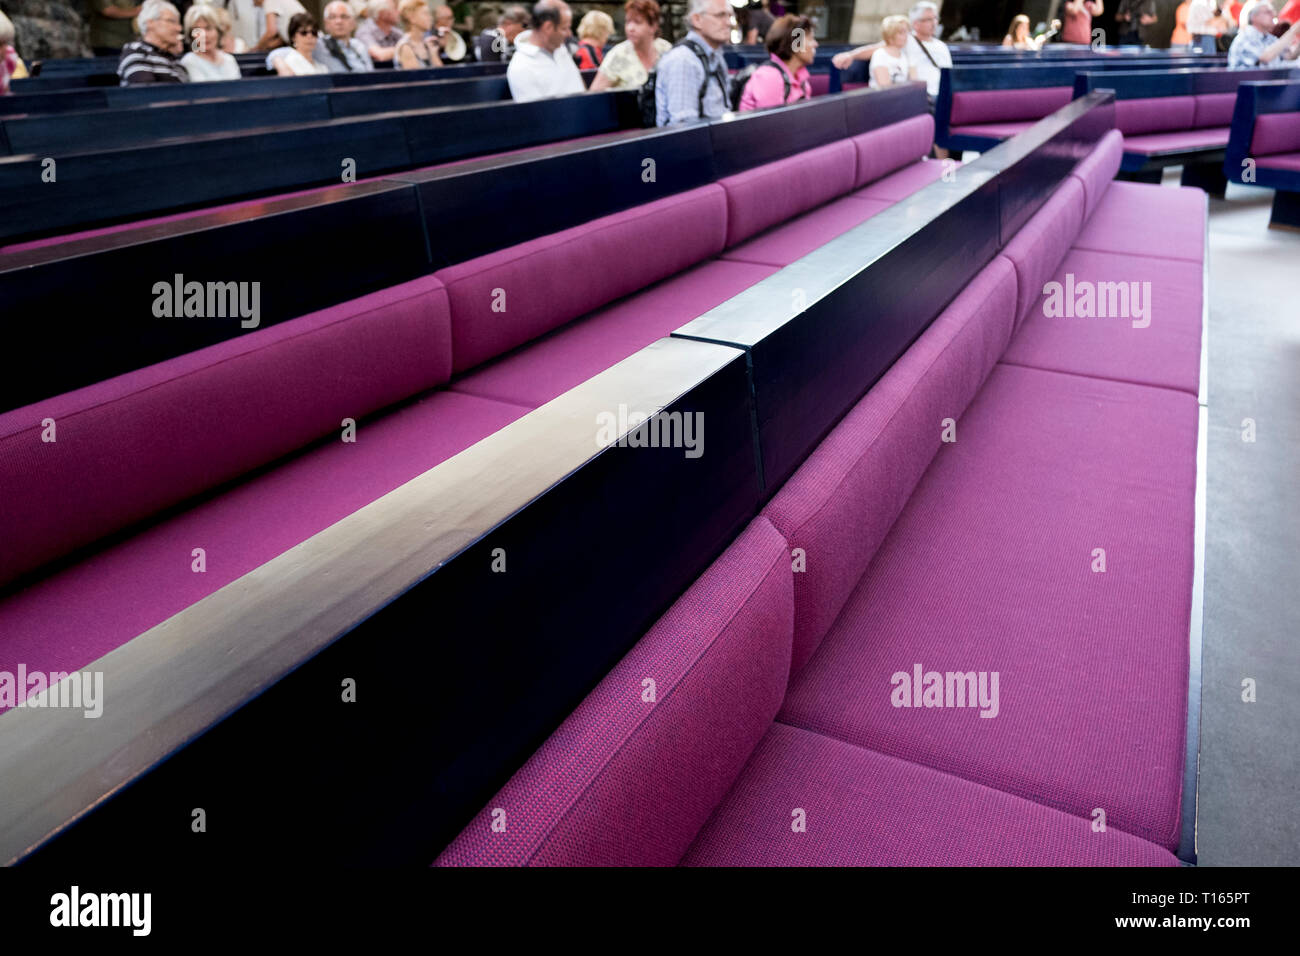 A look at the lovely purple cushions on the benches, pews of Temppeliaukio Lutheran church in Helsinki, Finland. The church was built in 1969. Stock Photo